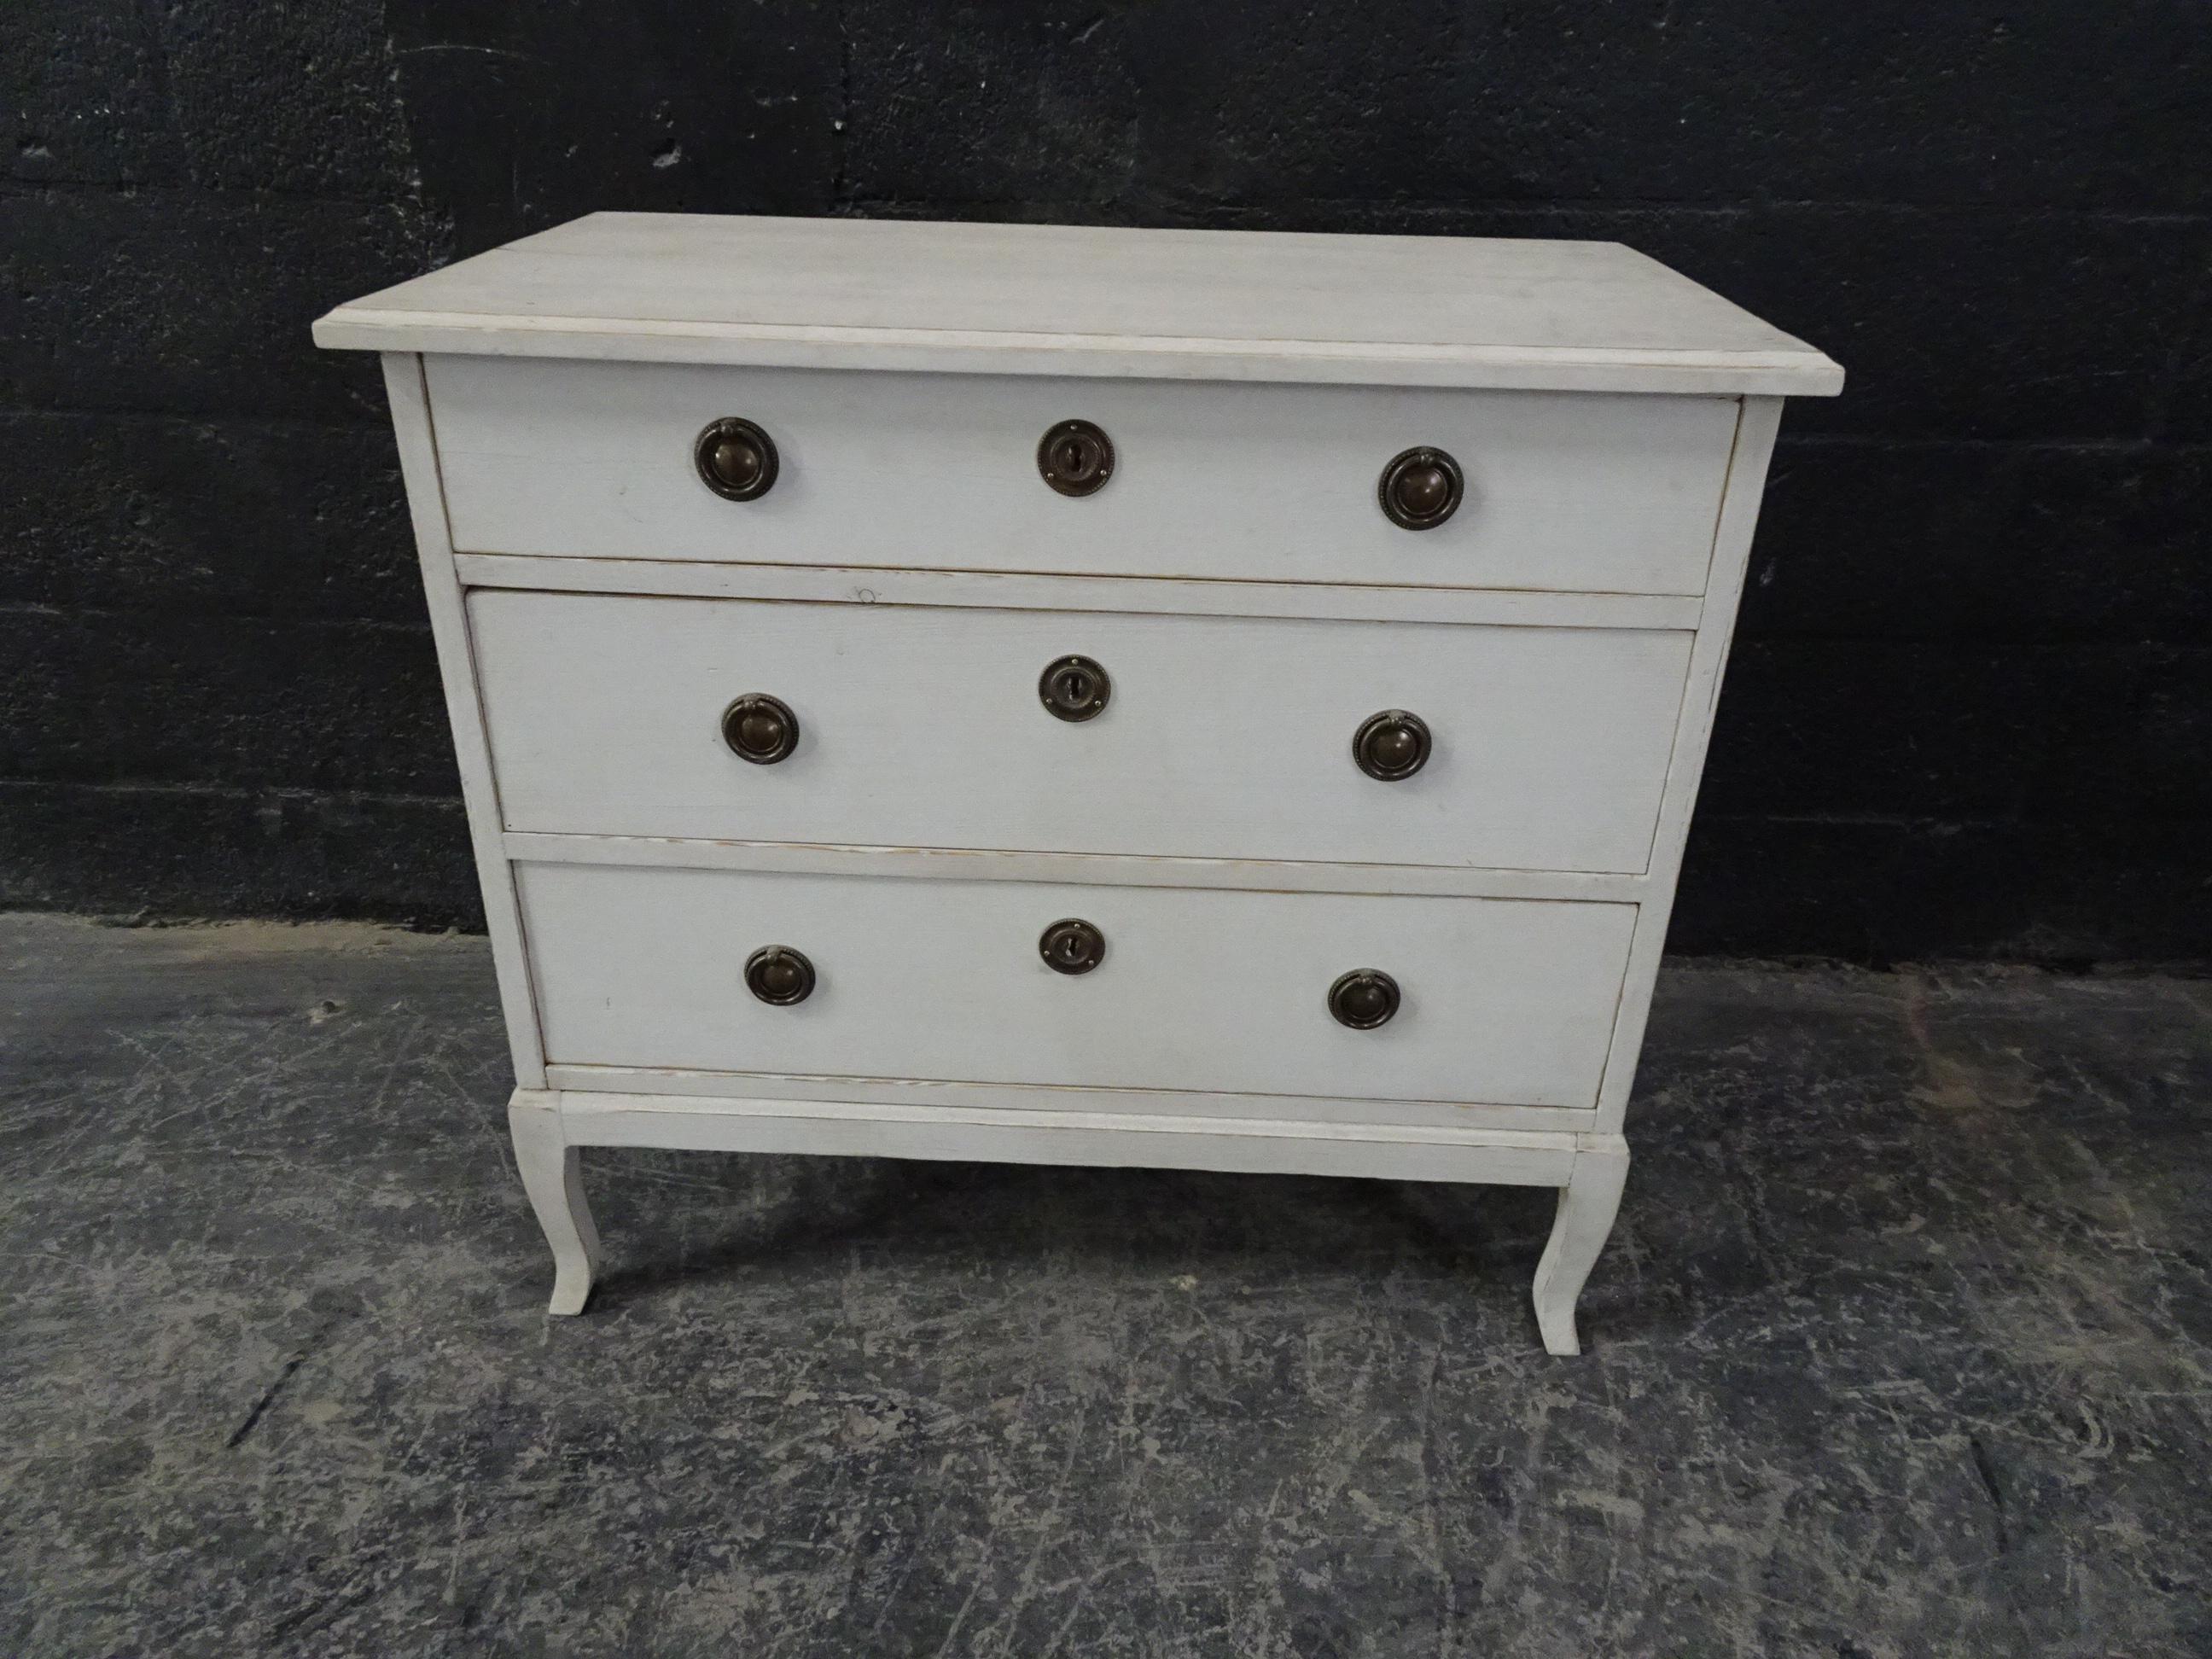 This is a Swedish Gustavian chest of drawers, its been restored and repainted with milk paints 